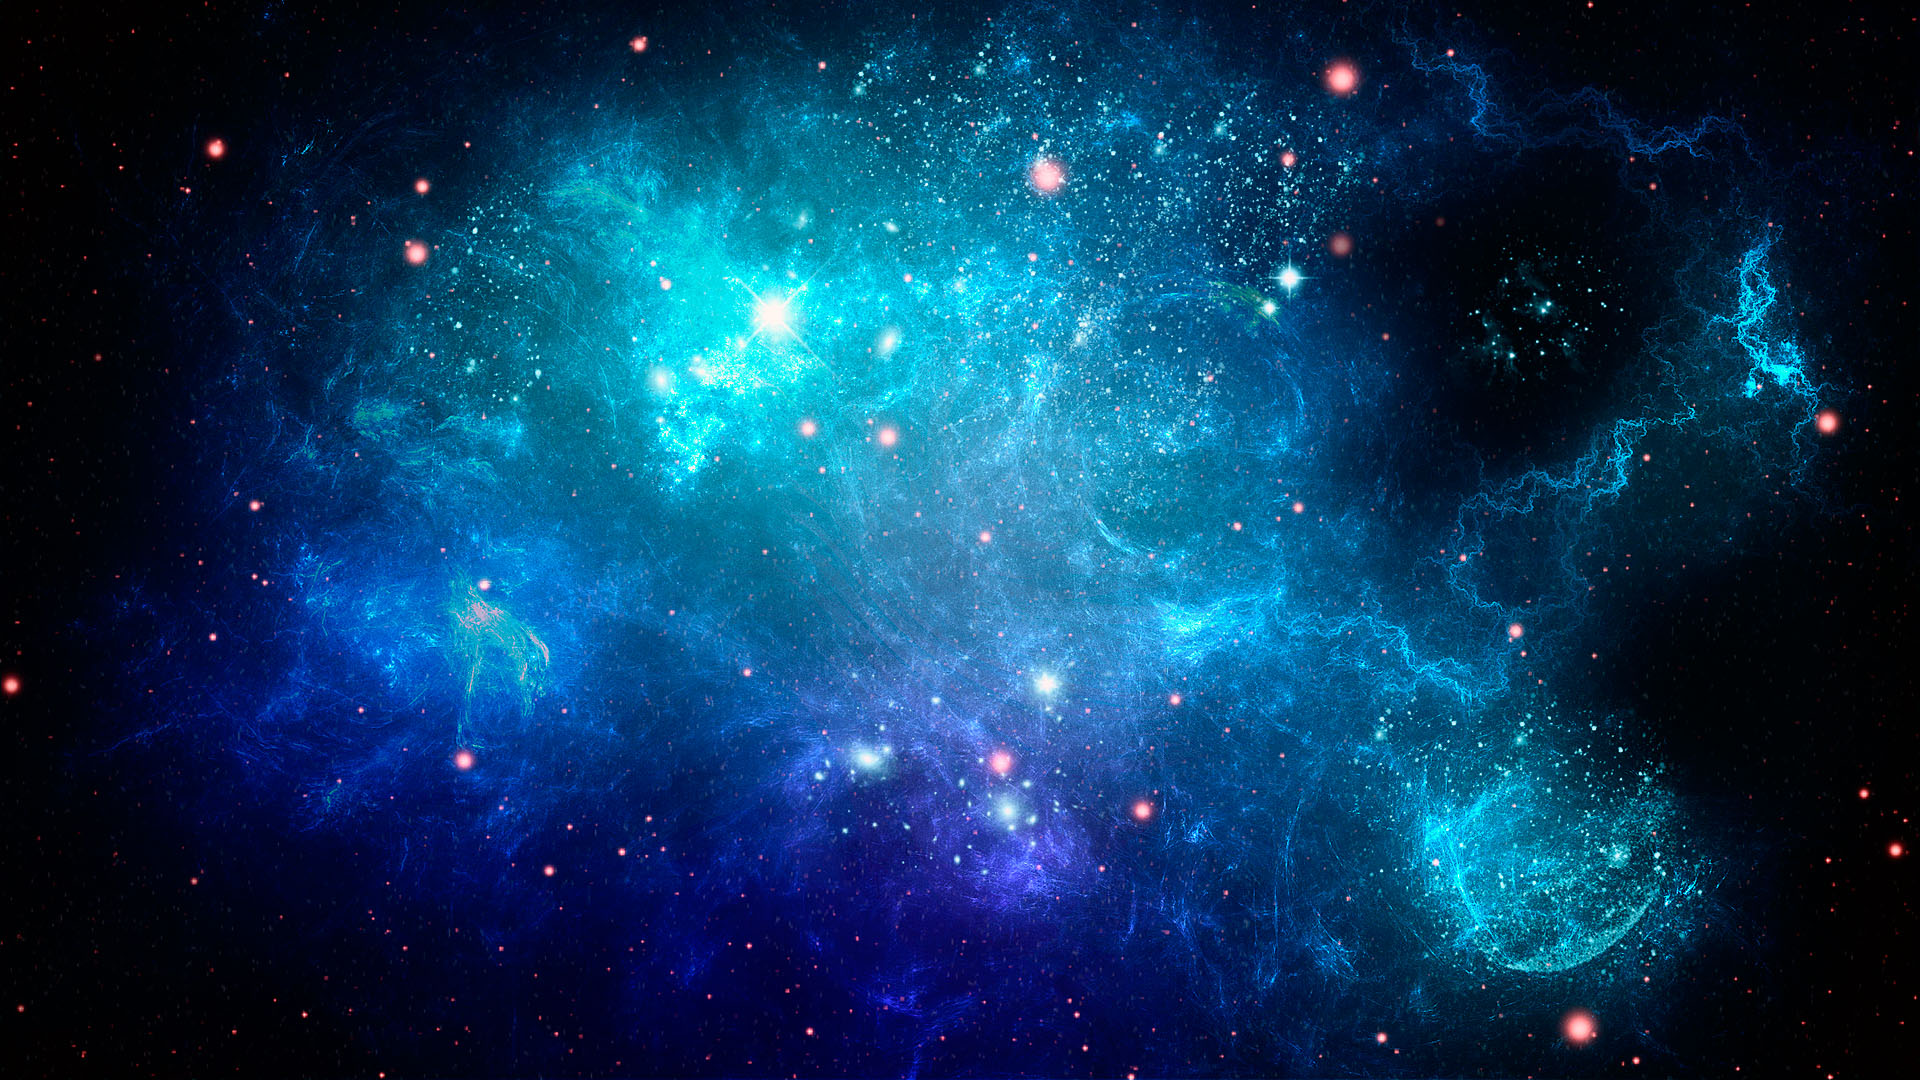 space wallpaper hd,outer space,galaxy,blue,nebula,astronomical object